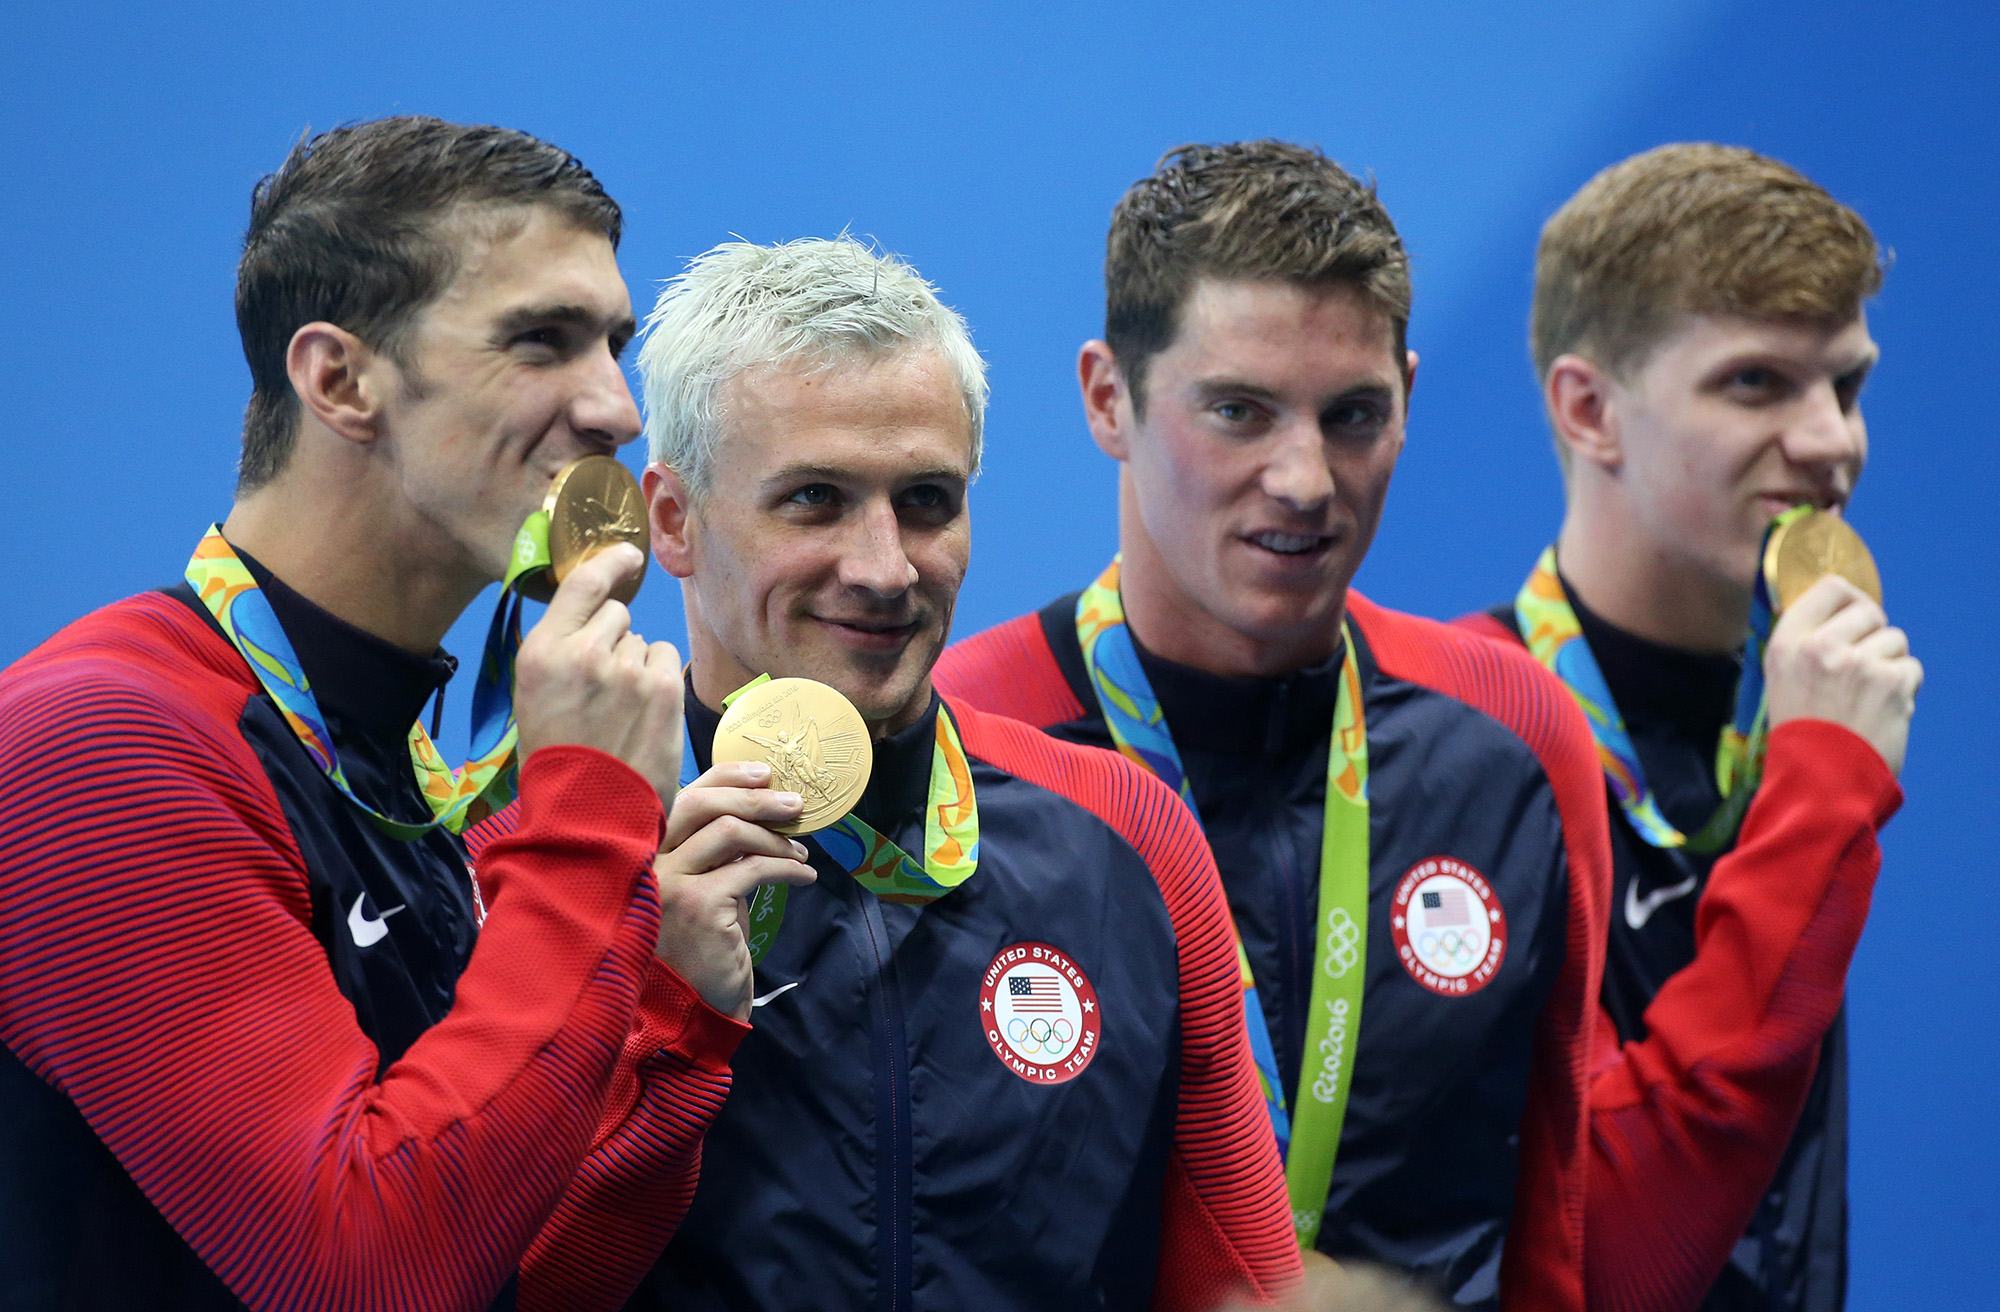 Michael Phelps, Ryan Lochte, Conor Dwyer, Francis Haas of Team USA celebrate winning the gold medal during the medal ceremony of the men's 200m freestyle relay on day 4 of the Rio 2016 Olympic Games at Olympic Aquatics Stadium on August 9, 2016 in Rio de Janeiro, Brazil. (Jean Catuffe-Getty Images)